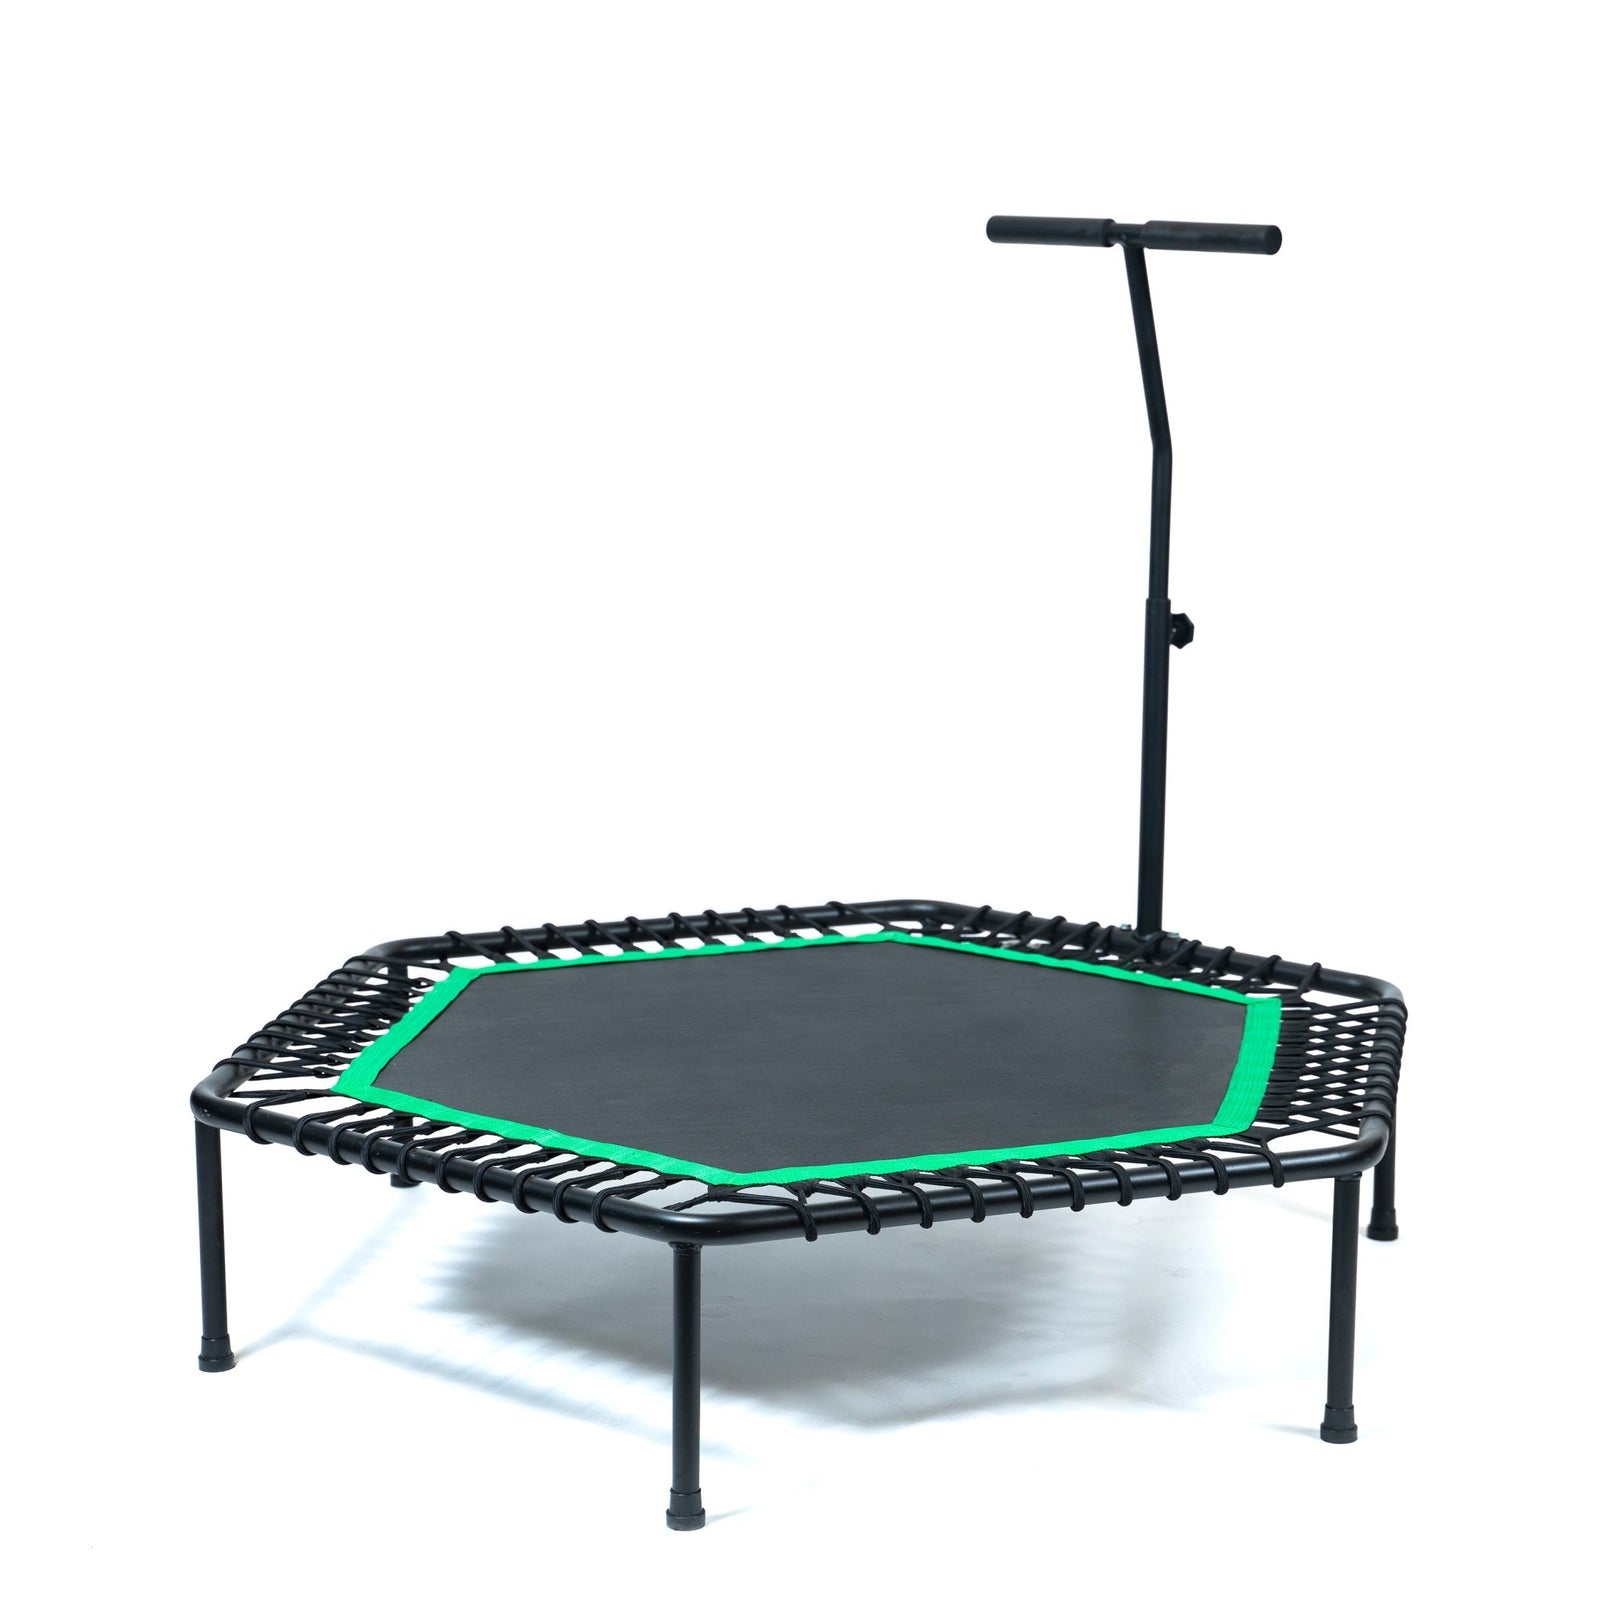 Model 220 Fitness Trampoline - Fitness Experience